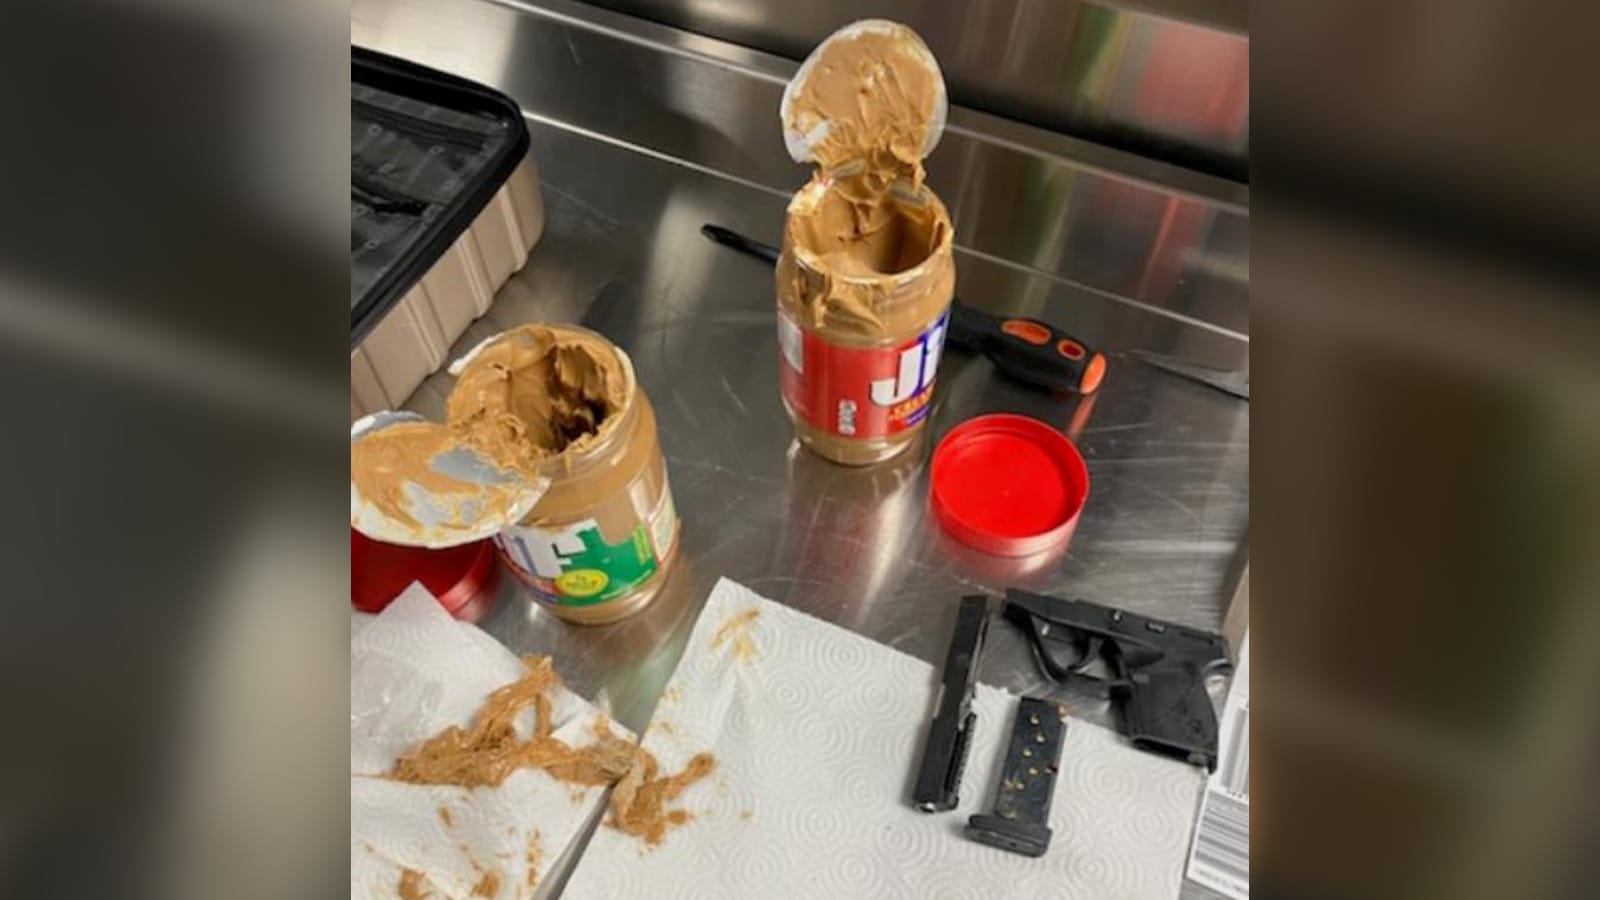 "Brilliantly concealed".. Finding gun parts in two peanut butter jars at an American airport